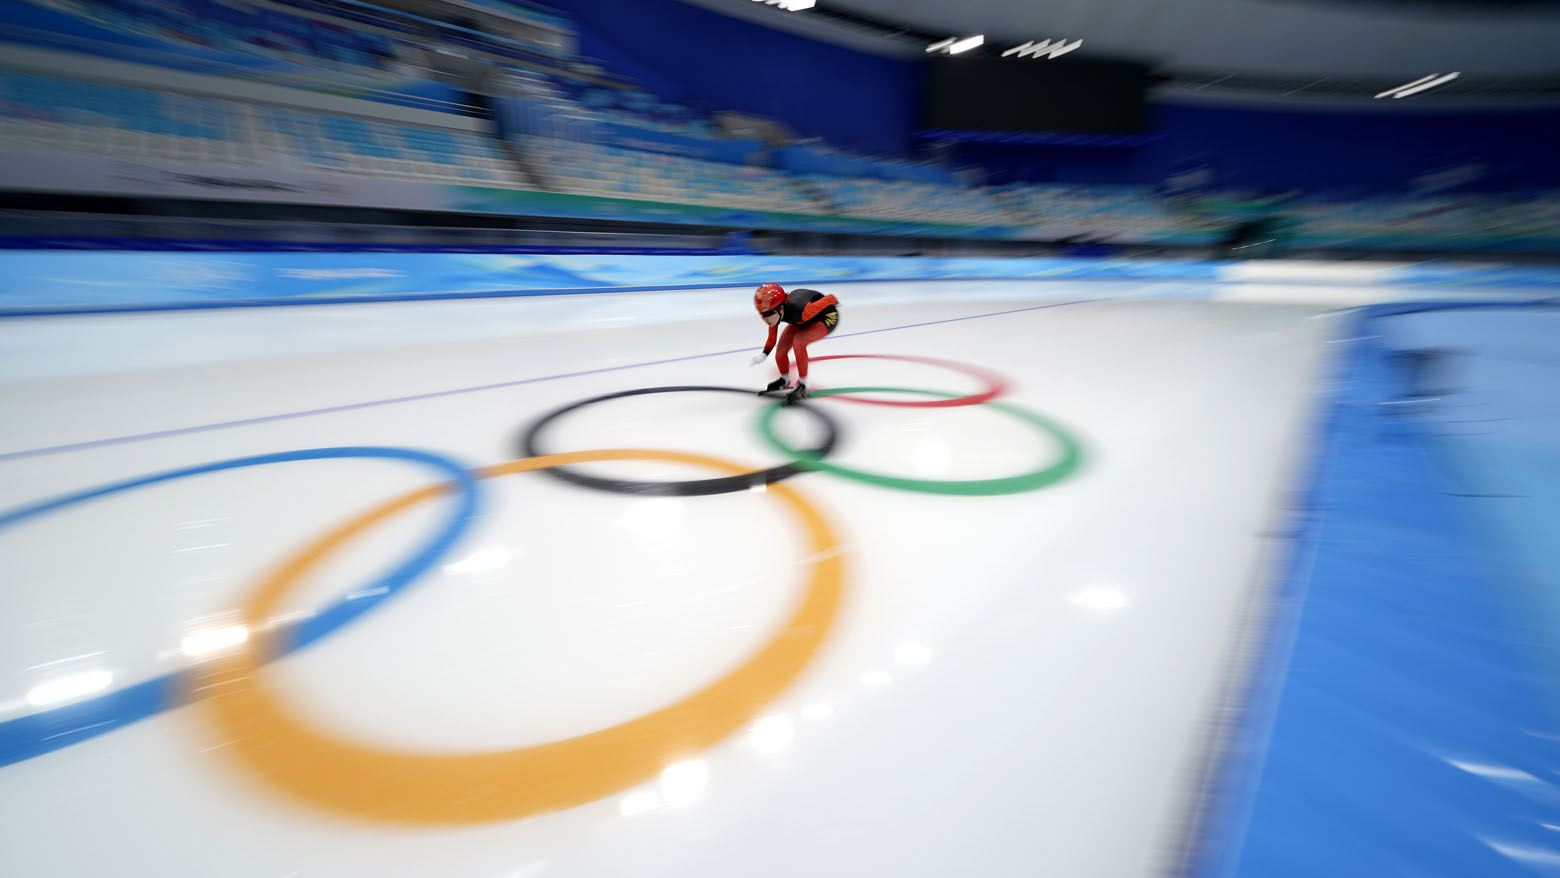 <p>Han Mei of China skates during a speedskating practice session at the 2022 Winter Olympics, Monday, Feb. 14, 2022, in Beijing.</p>
